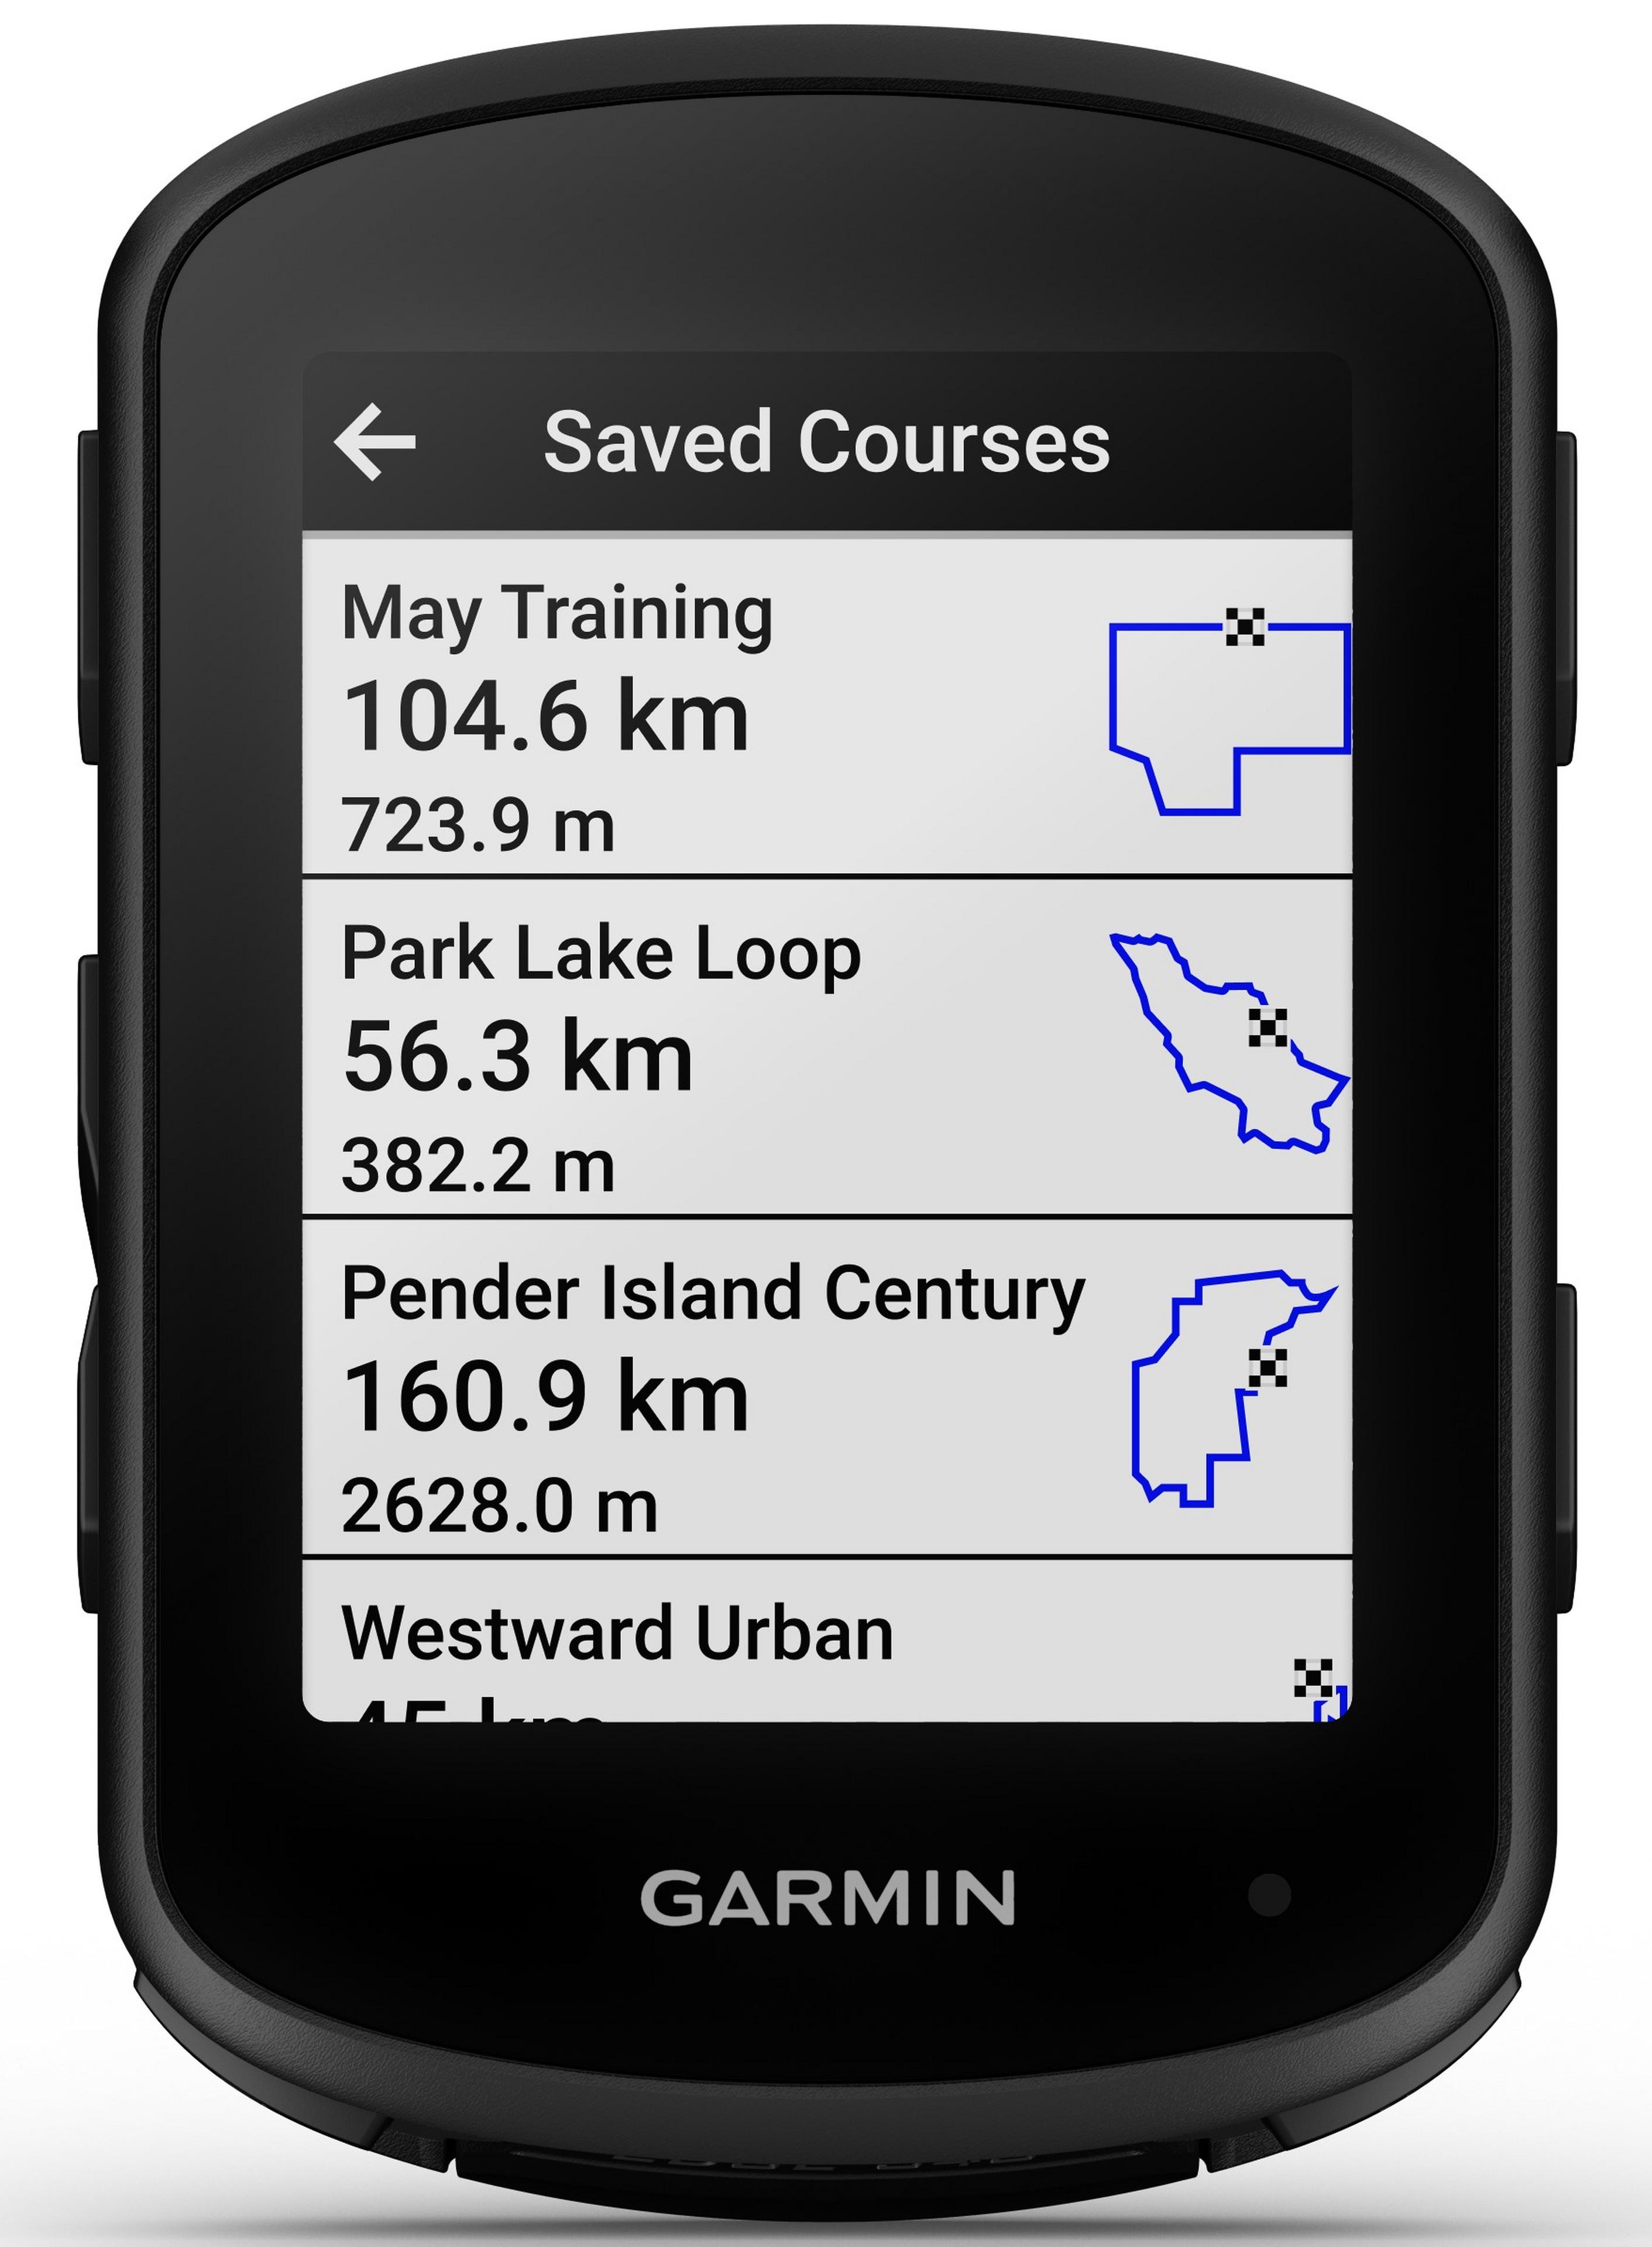  Garmin Edge 840 Compact GPS Cycling Handheld Computer with  Naviation and Signature Series Hard Case : Electronics